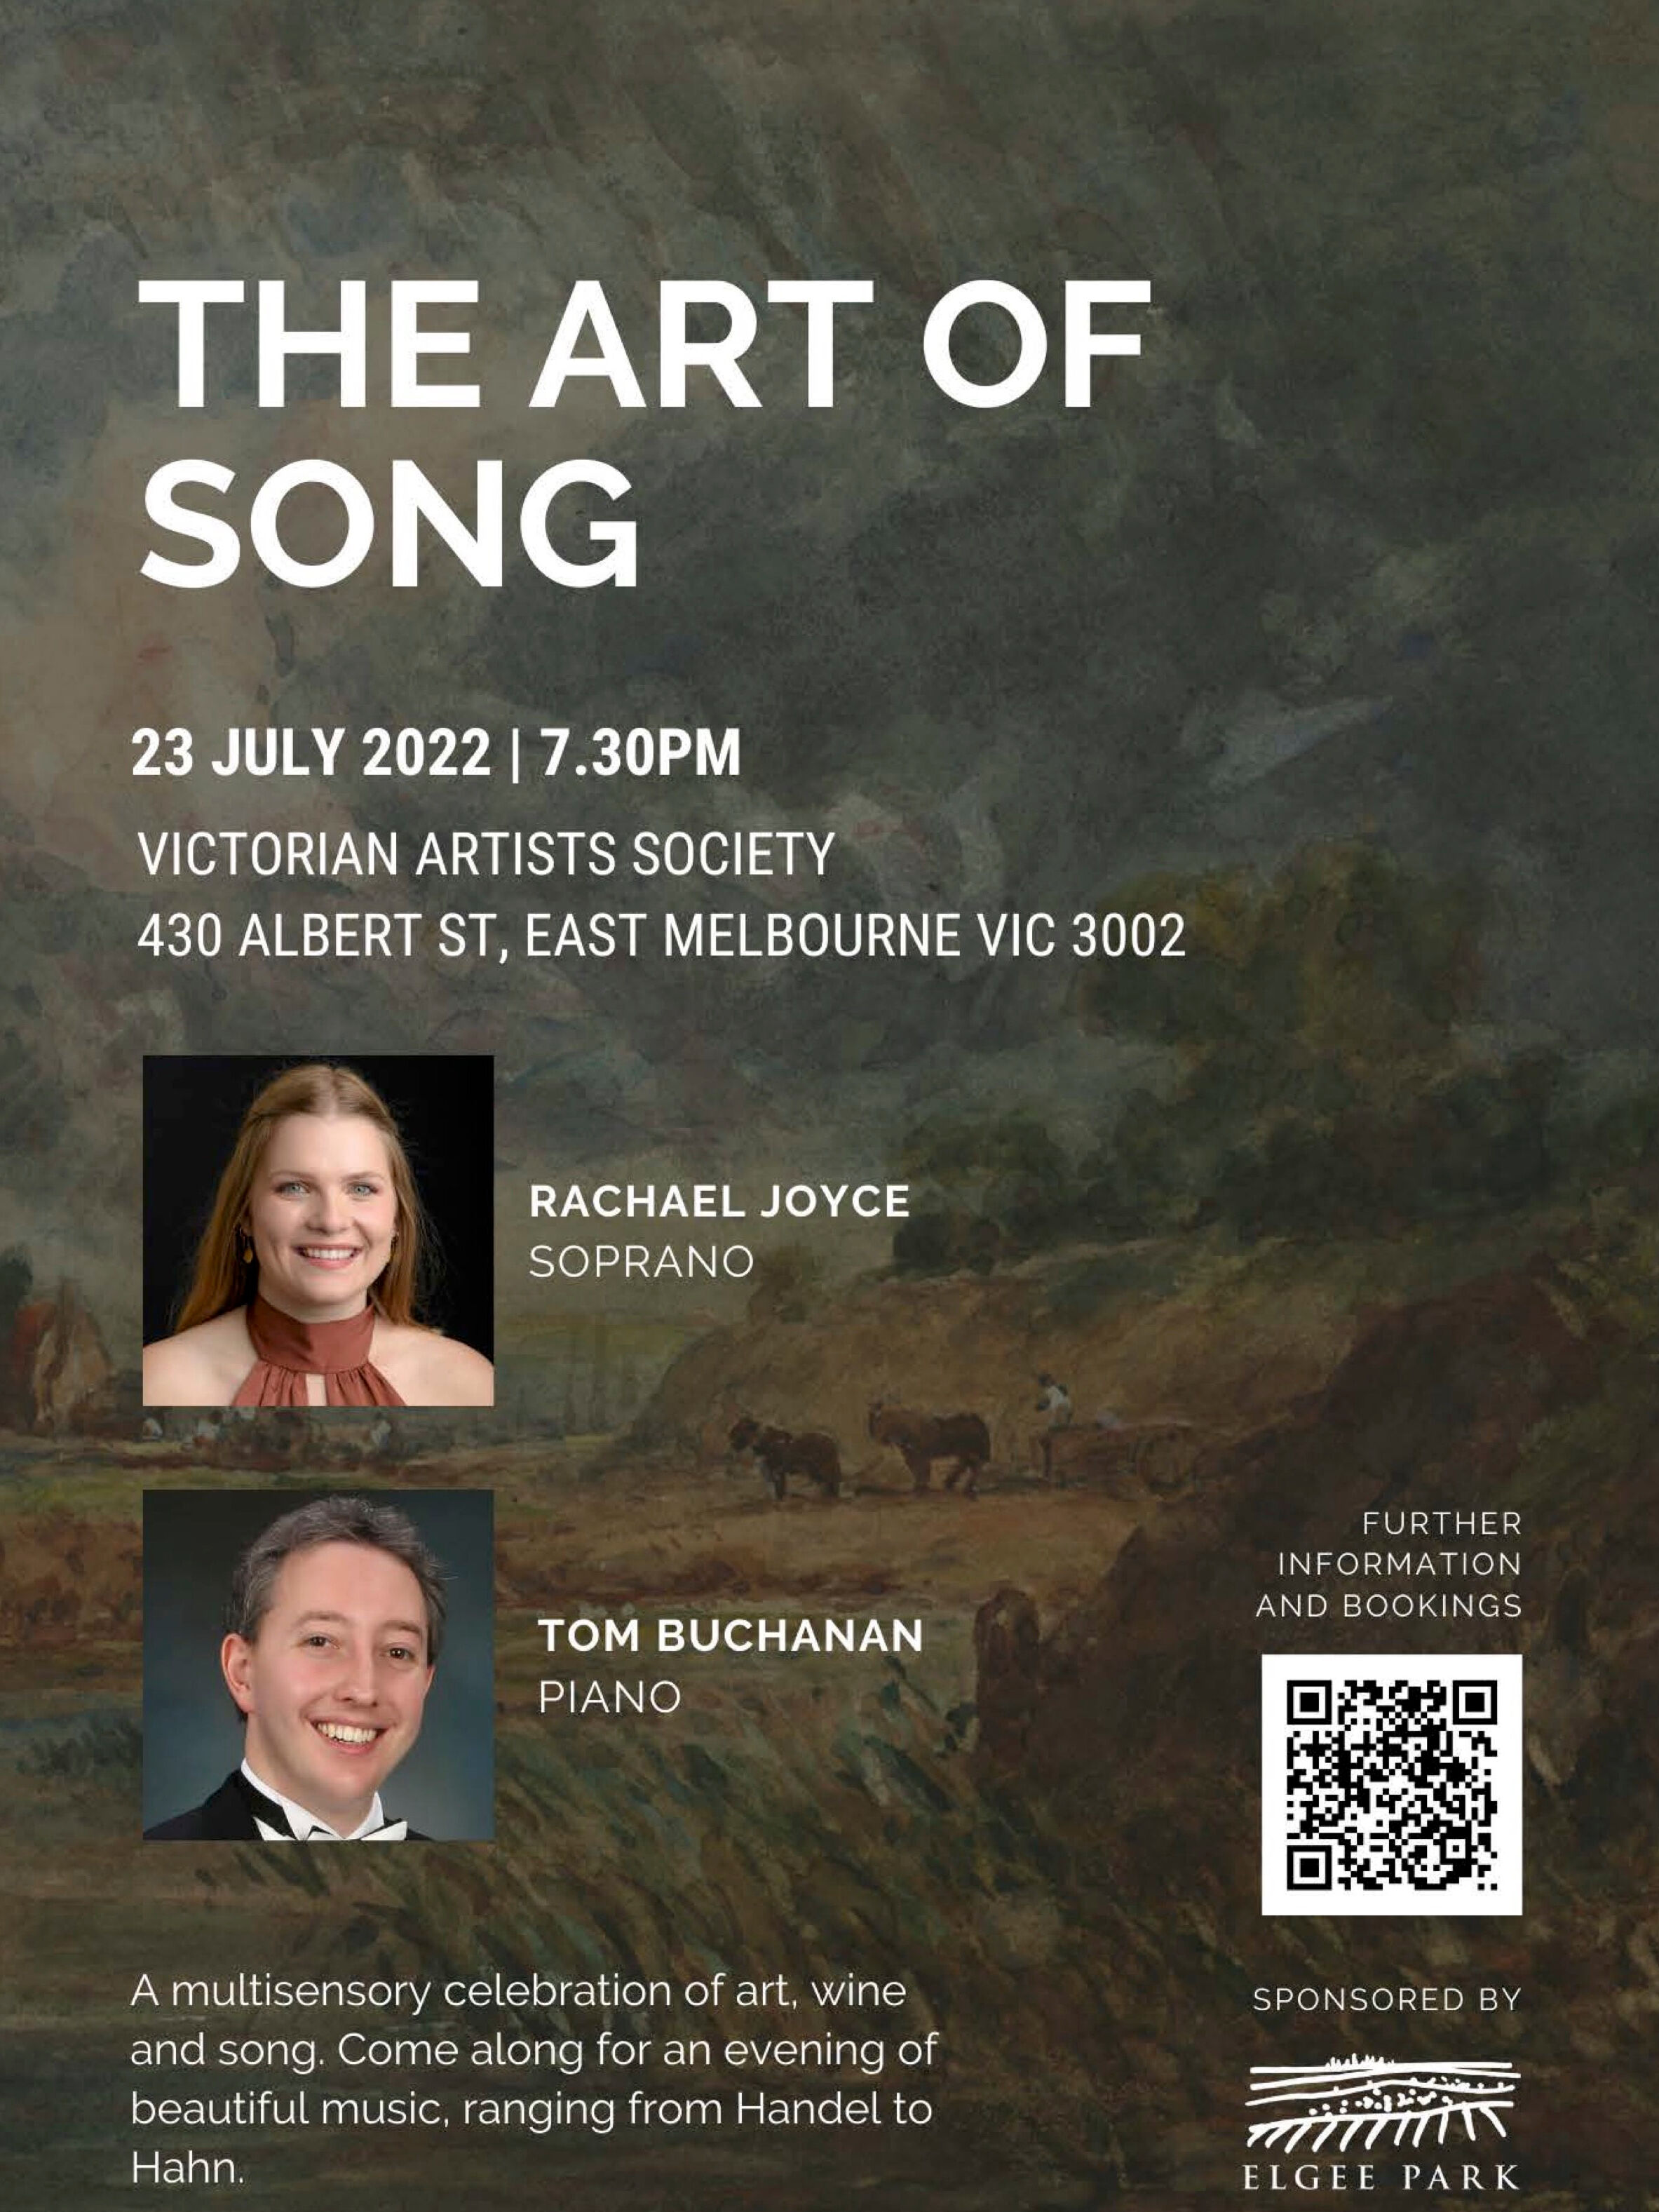 The Art of Song Poster copy